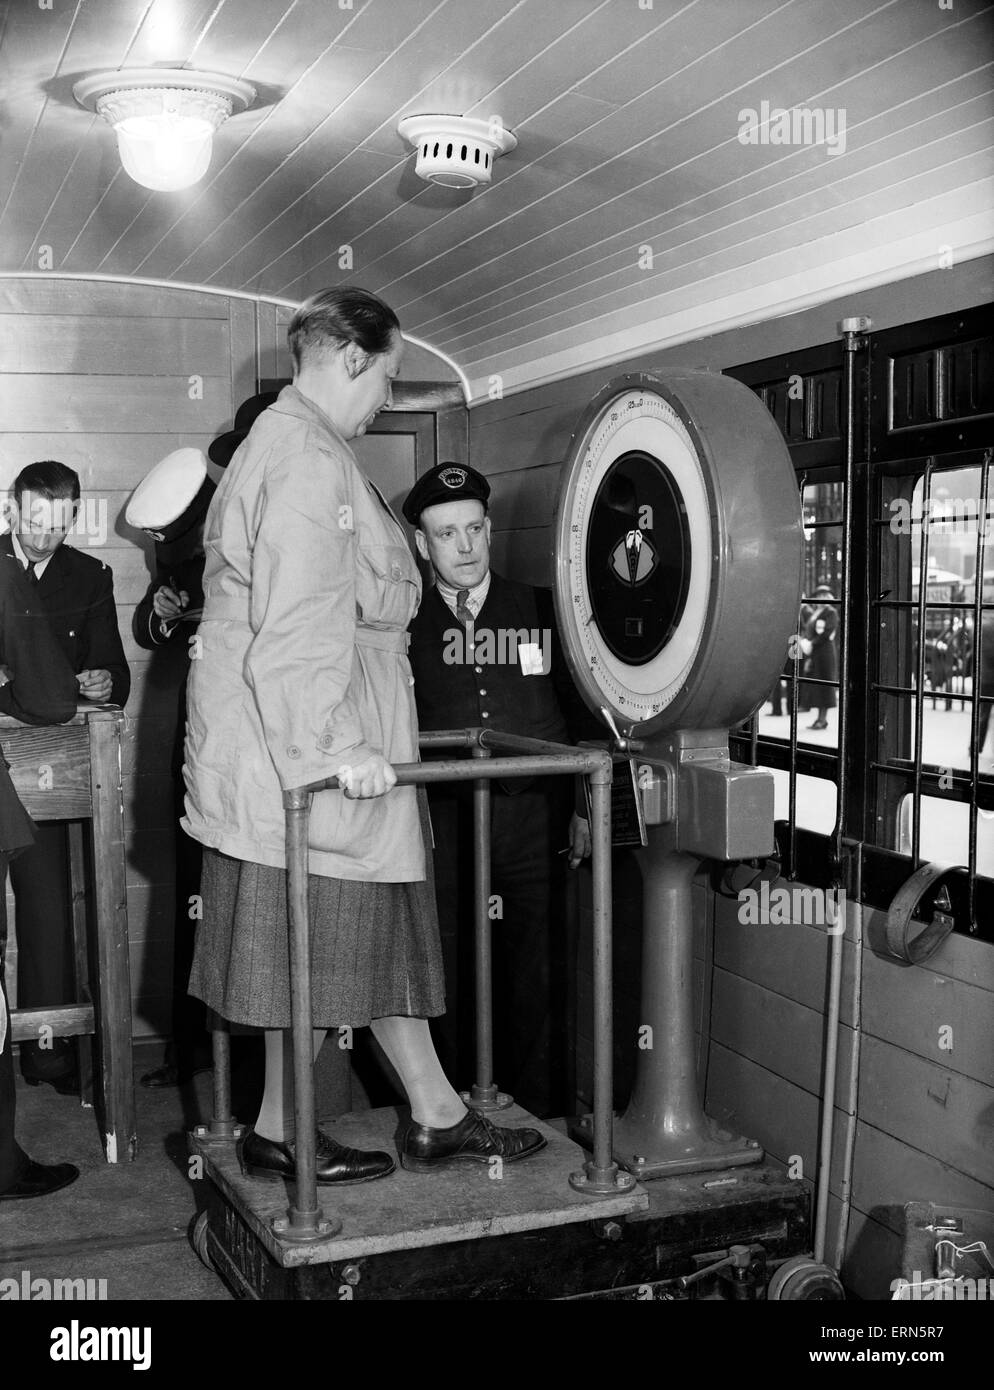 Series of images for Daily Herald Feature flight to Australia. 26th June 1938Series of images for Daily Herald Feature flight to Australia. 26th June 1938 Passengers bound for Australia are weighed at Paddington Station prior to their departure to Southampton, so Imperial Airways staff know how much cargo and mail can be loaded  aboard the flight for Brisbane Stock Photo